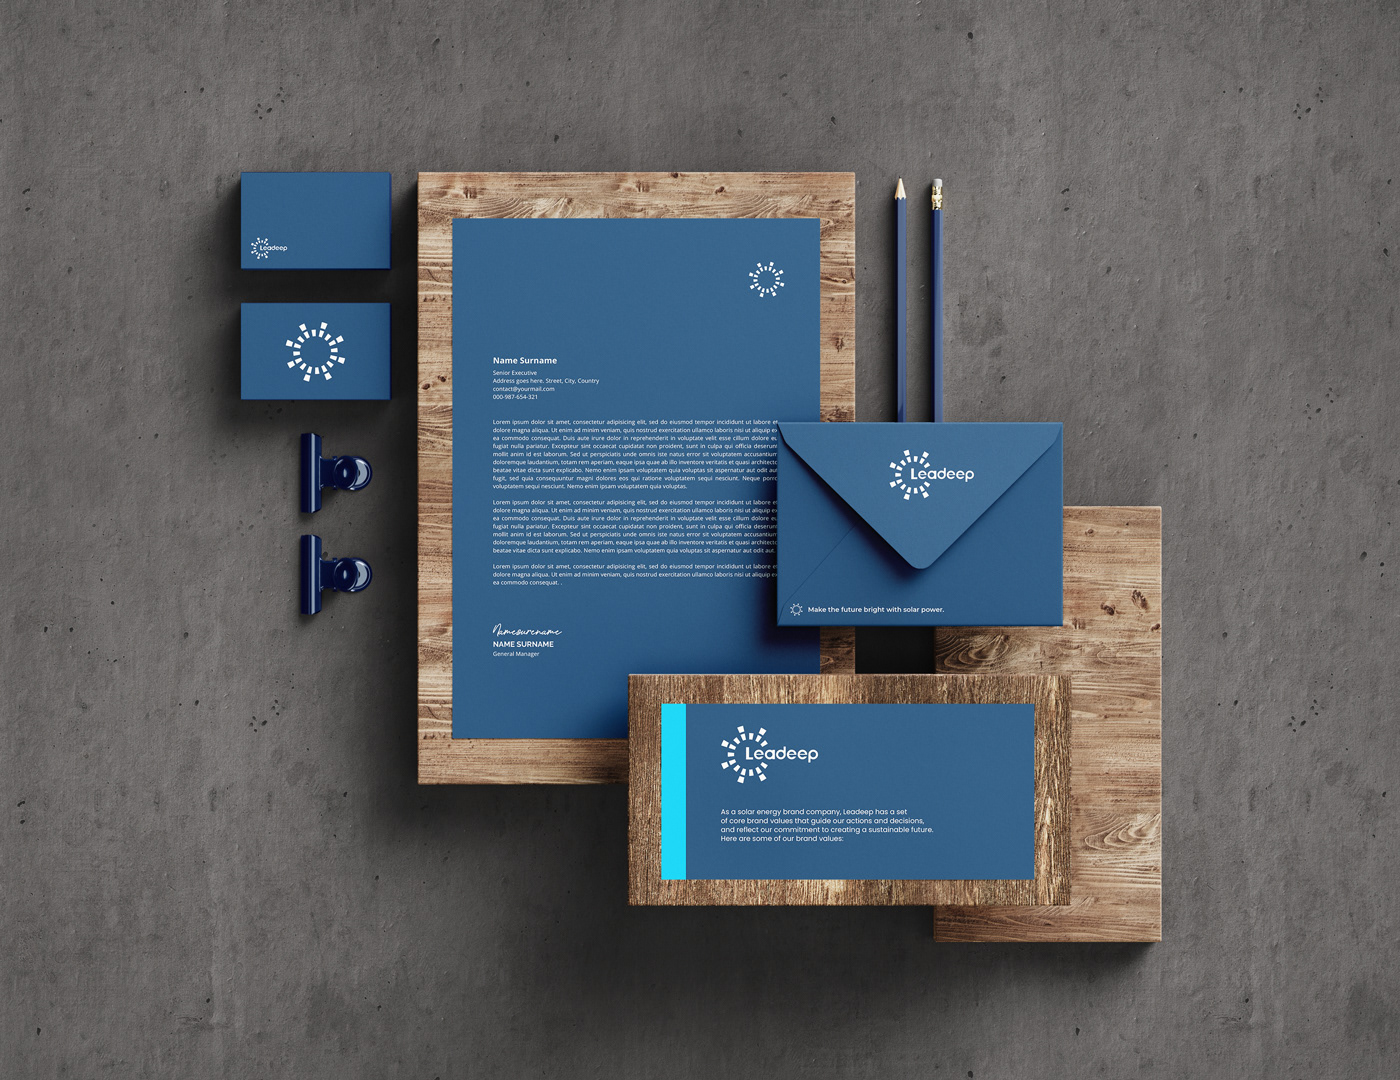 Brand Design brand guidelines brand identity brand style guide corporate energy green power solar visual identity